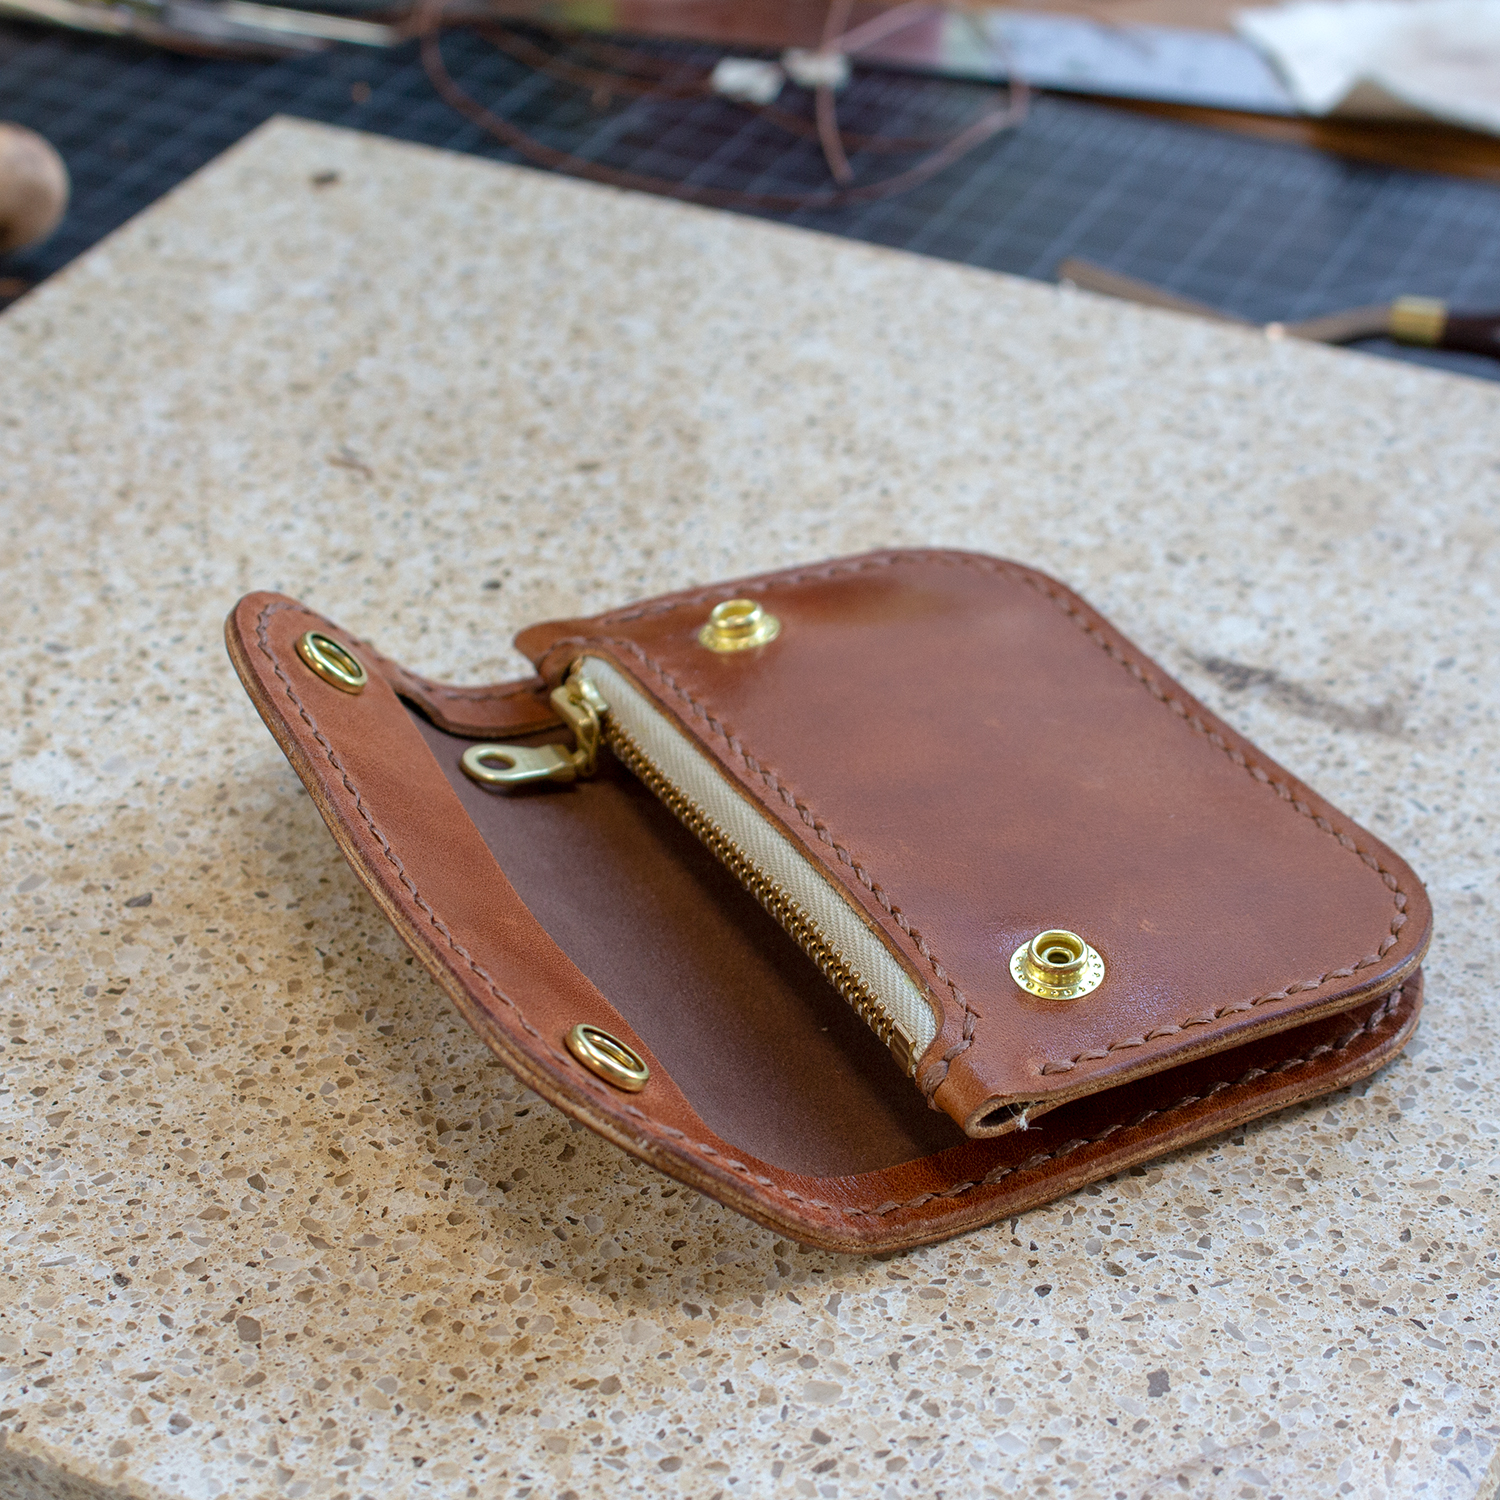 Make A Laced Leather Satchel - PATTERN